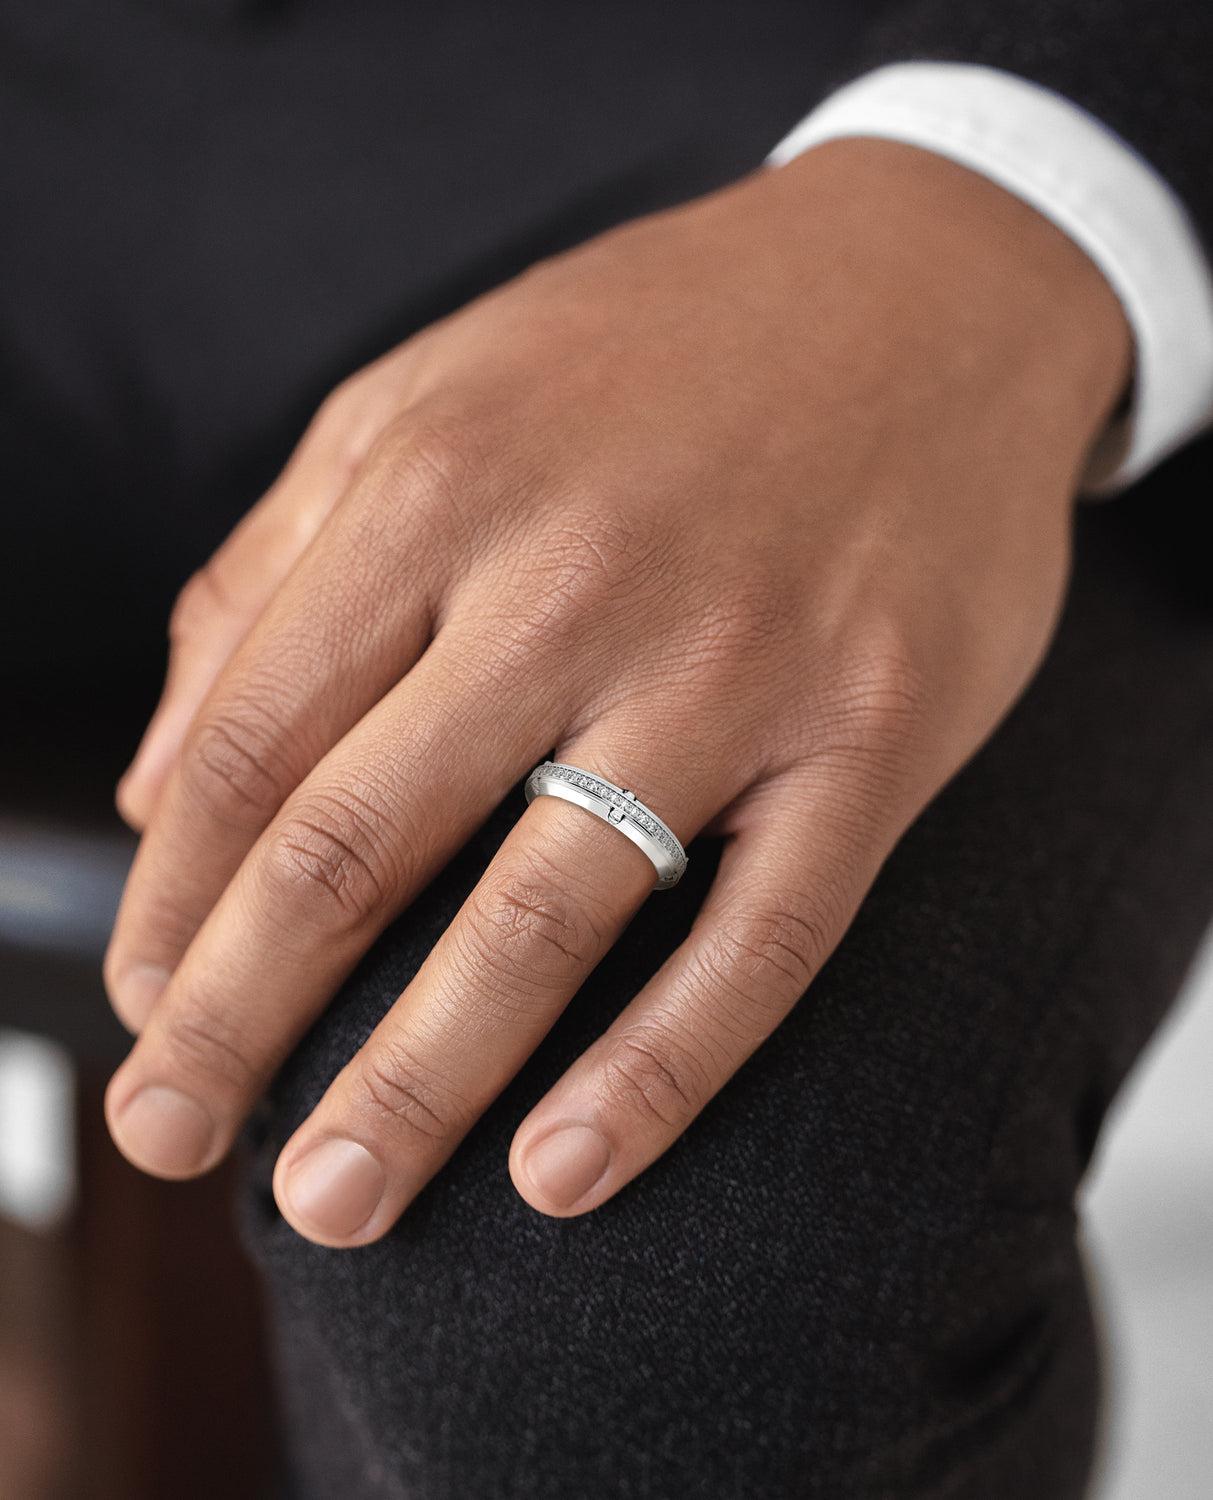 The CORTEZ ring is available in plain and a combination of 0.70ct sparkling brilliant cut white diamonds in a pave setting adjacent to shimmering Platinum. The versatility of the CORTEZ Platinum ring makes it a perfect match for any character that